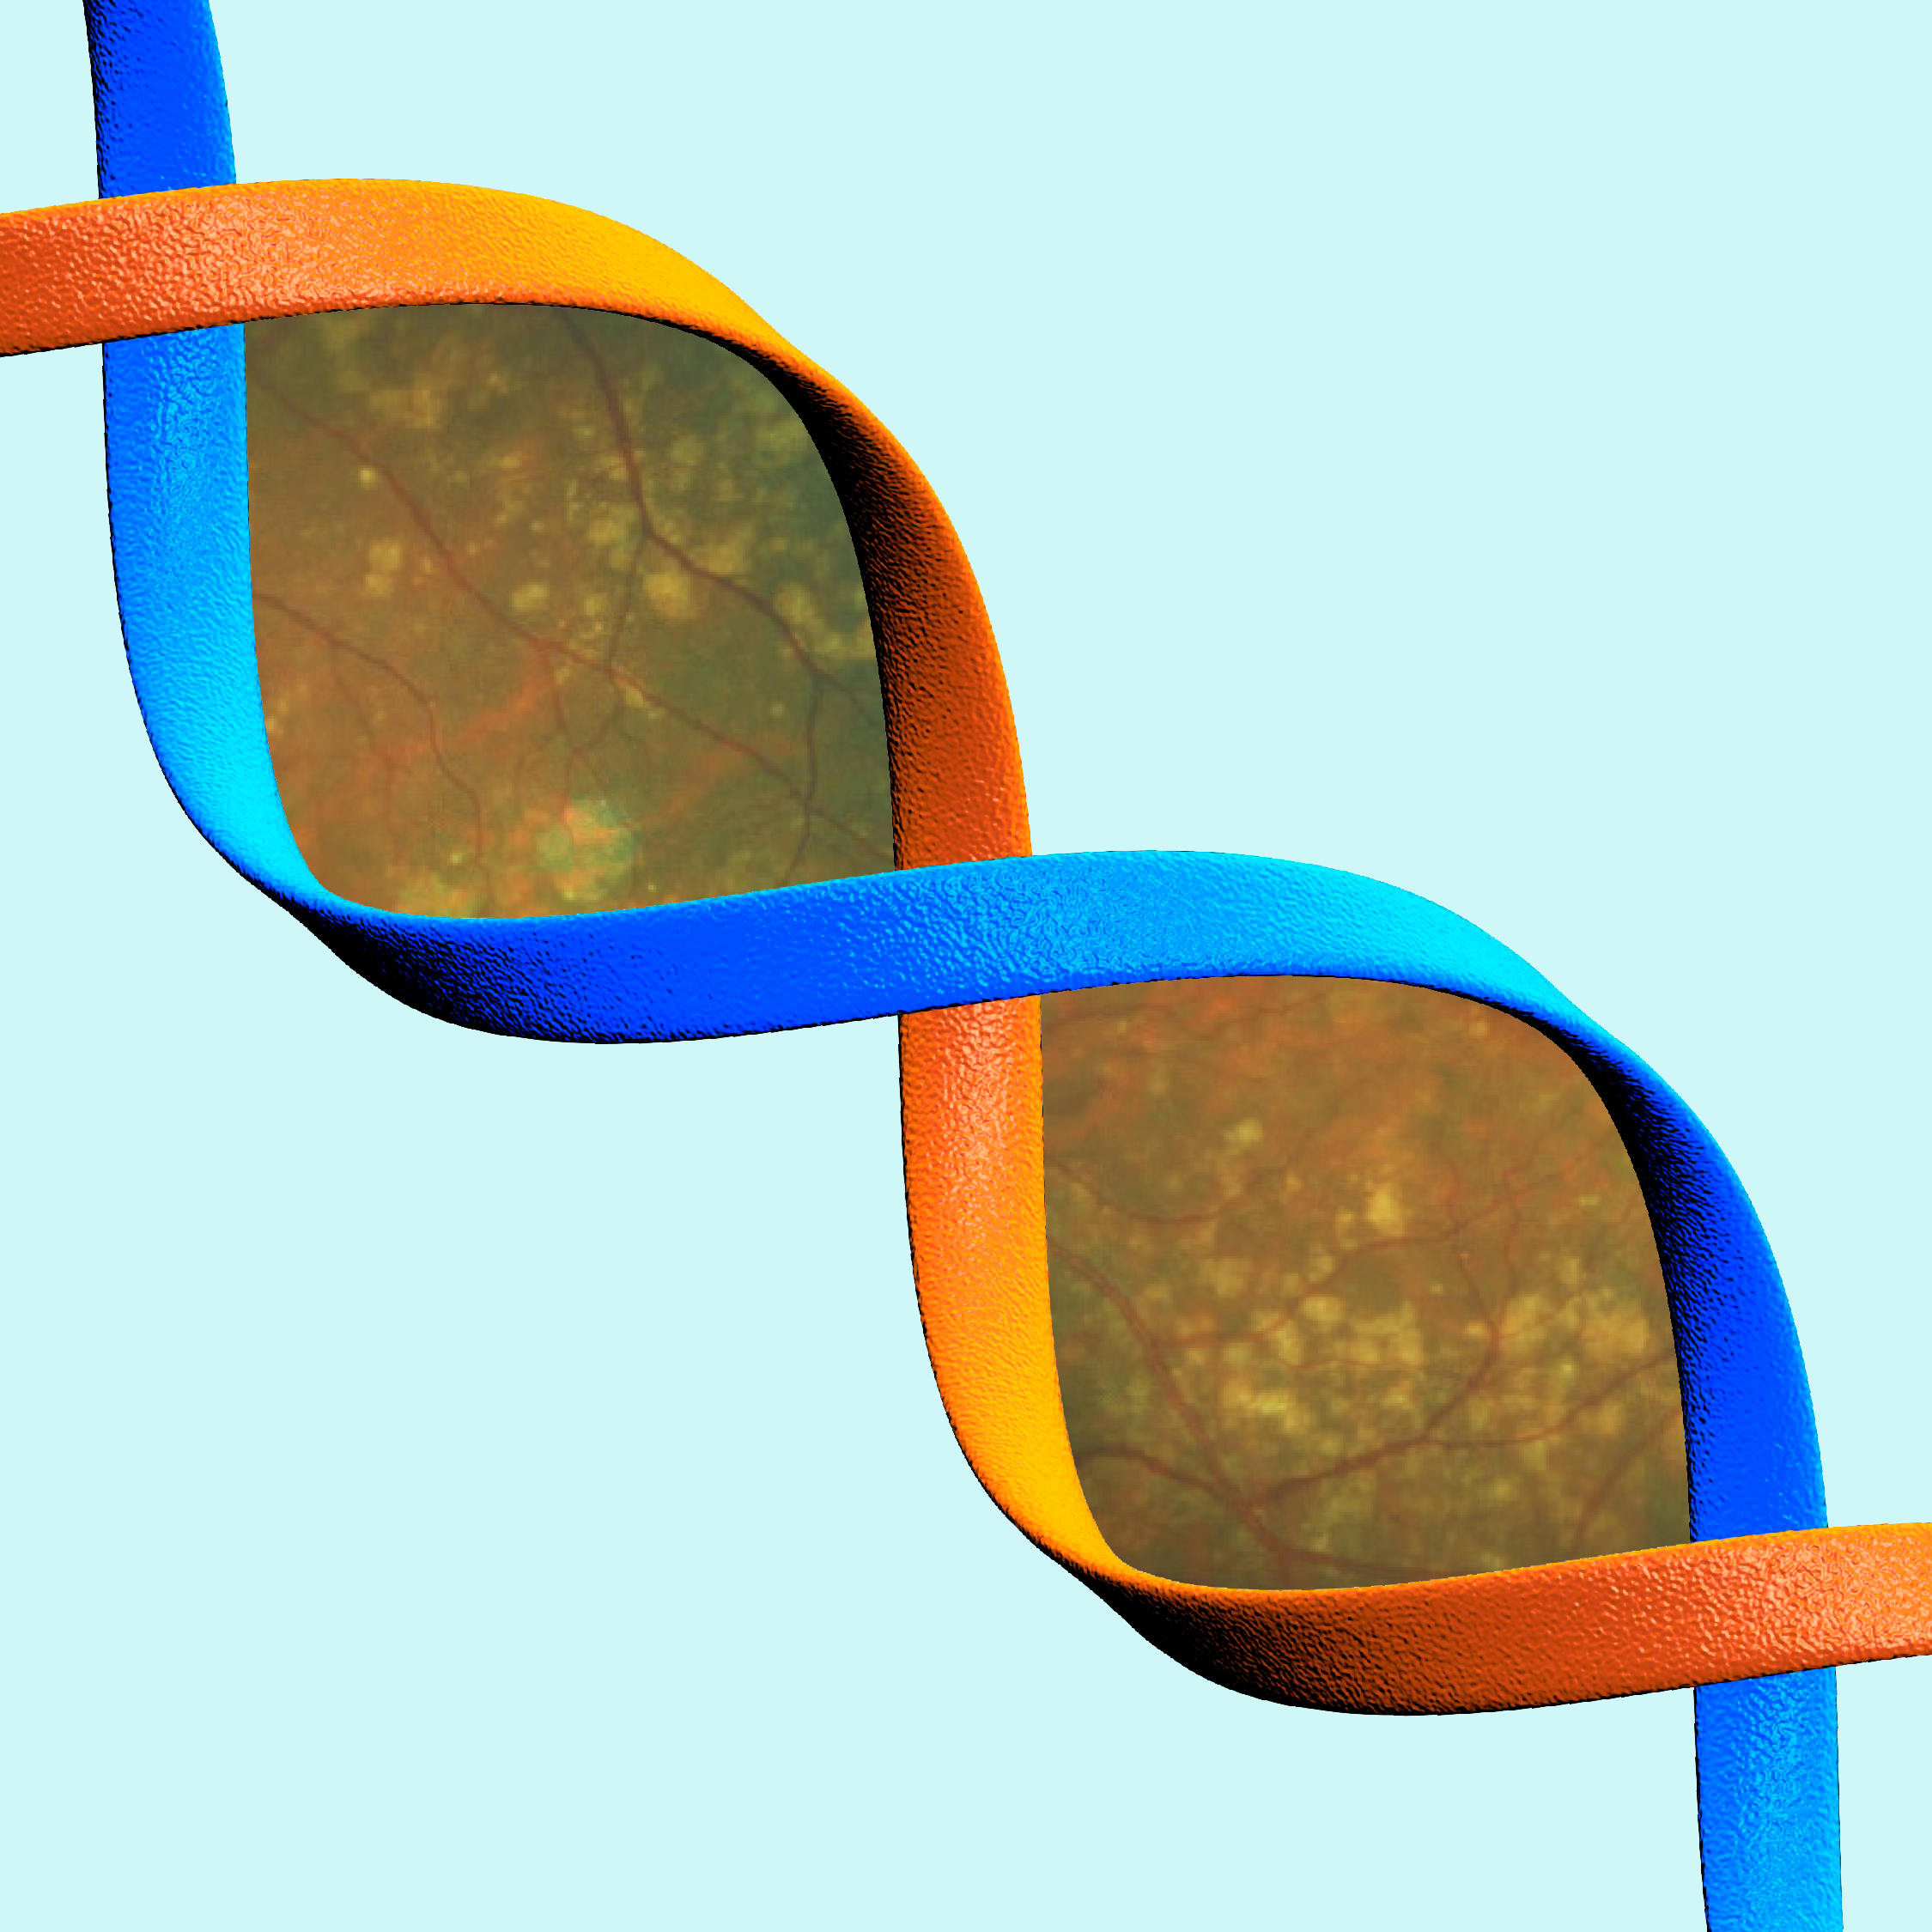 Drusen is likely a genetic marker for AMD, study finds.